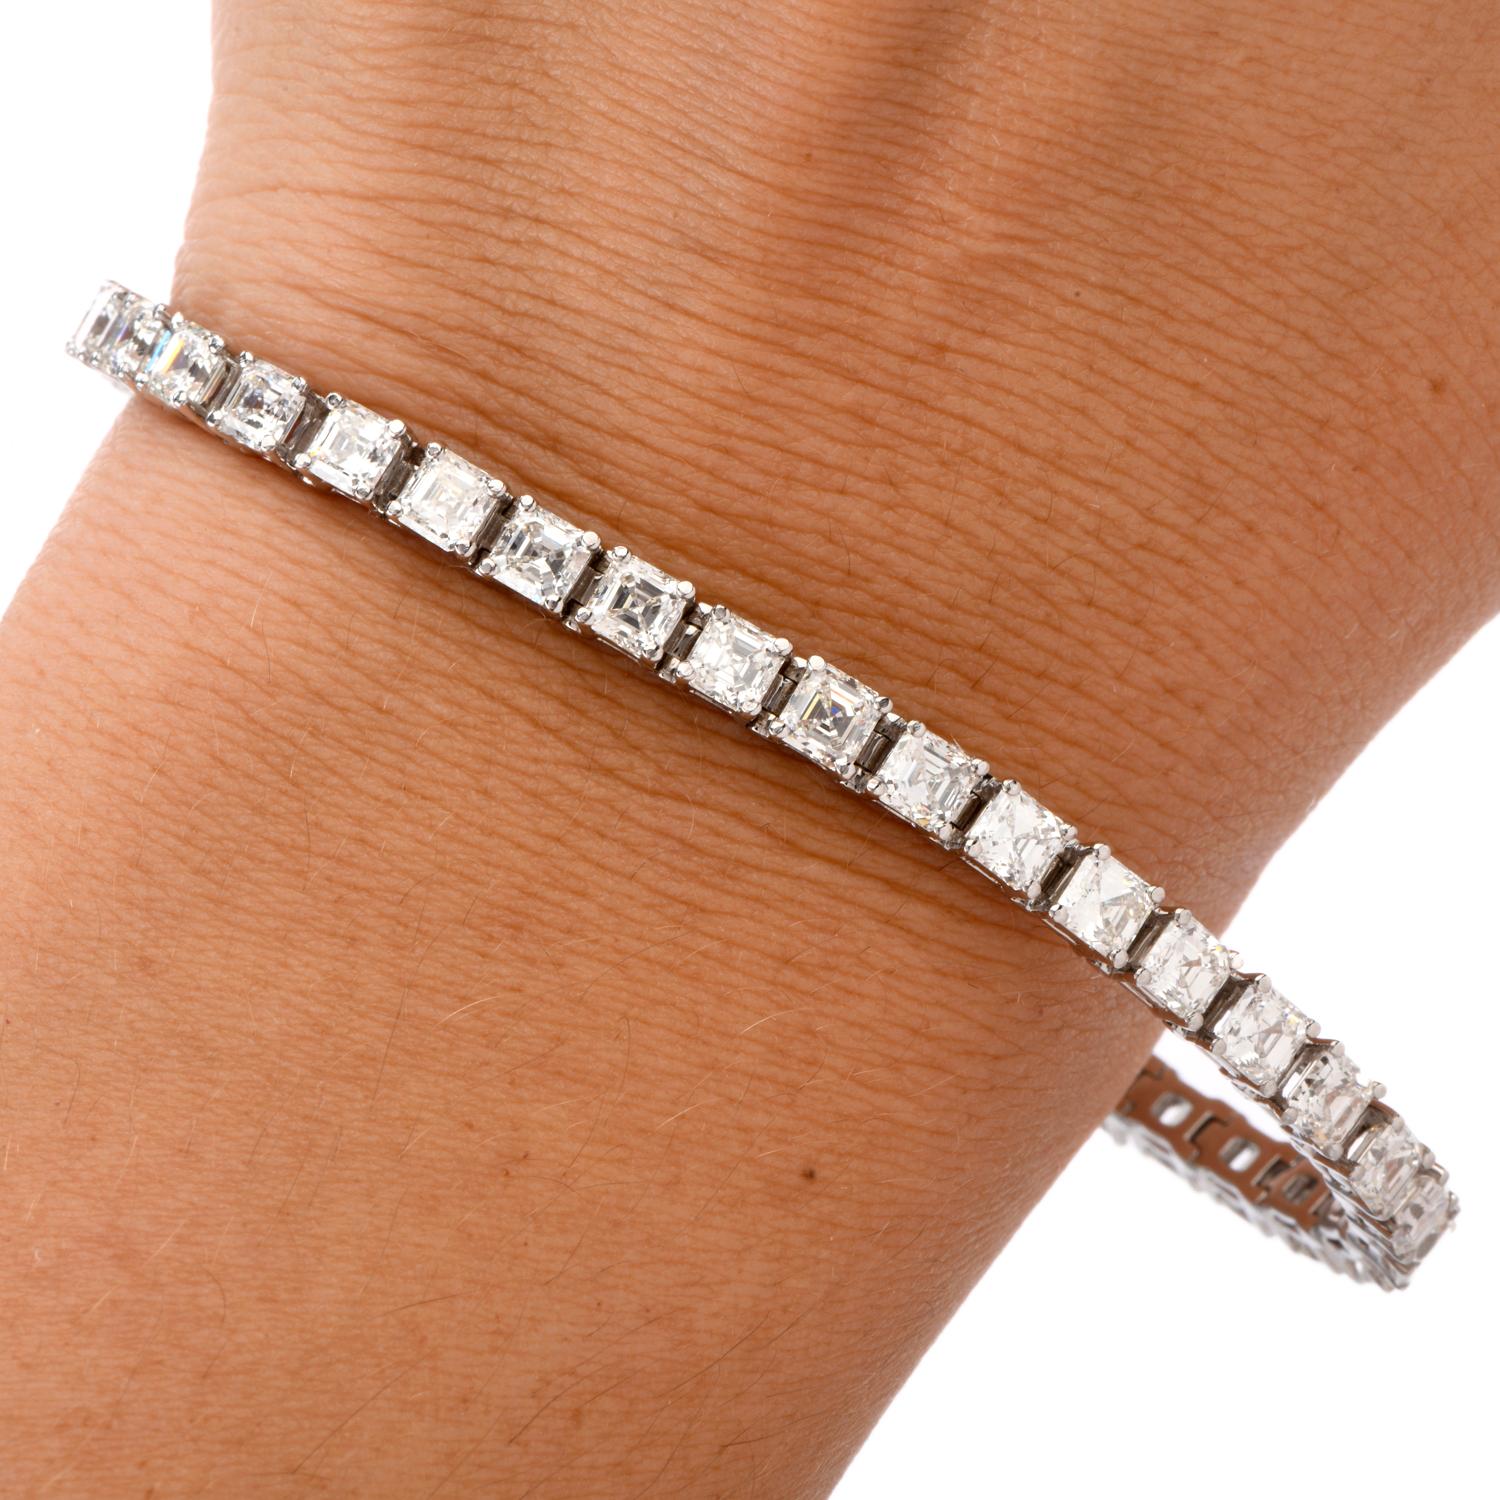 This exquisite Diamond Bracelet was inspired in a line Bracelet 

design and crafted in Platinum.

With 40 Asscher Cut DIamonds running from end to end

this bracelet has a combined diamond weight of appx. 13.20 carat

and are of G-H color and